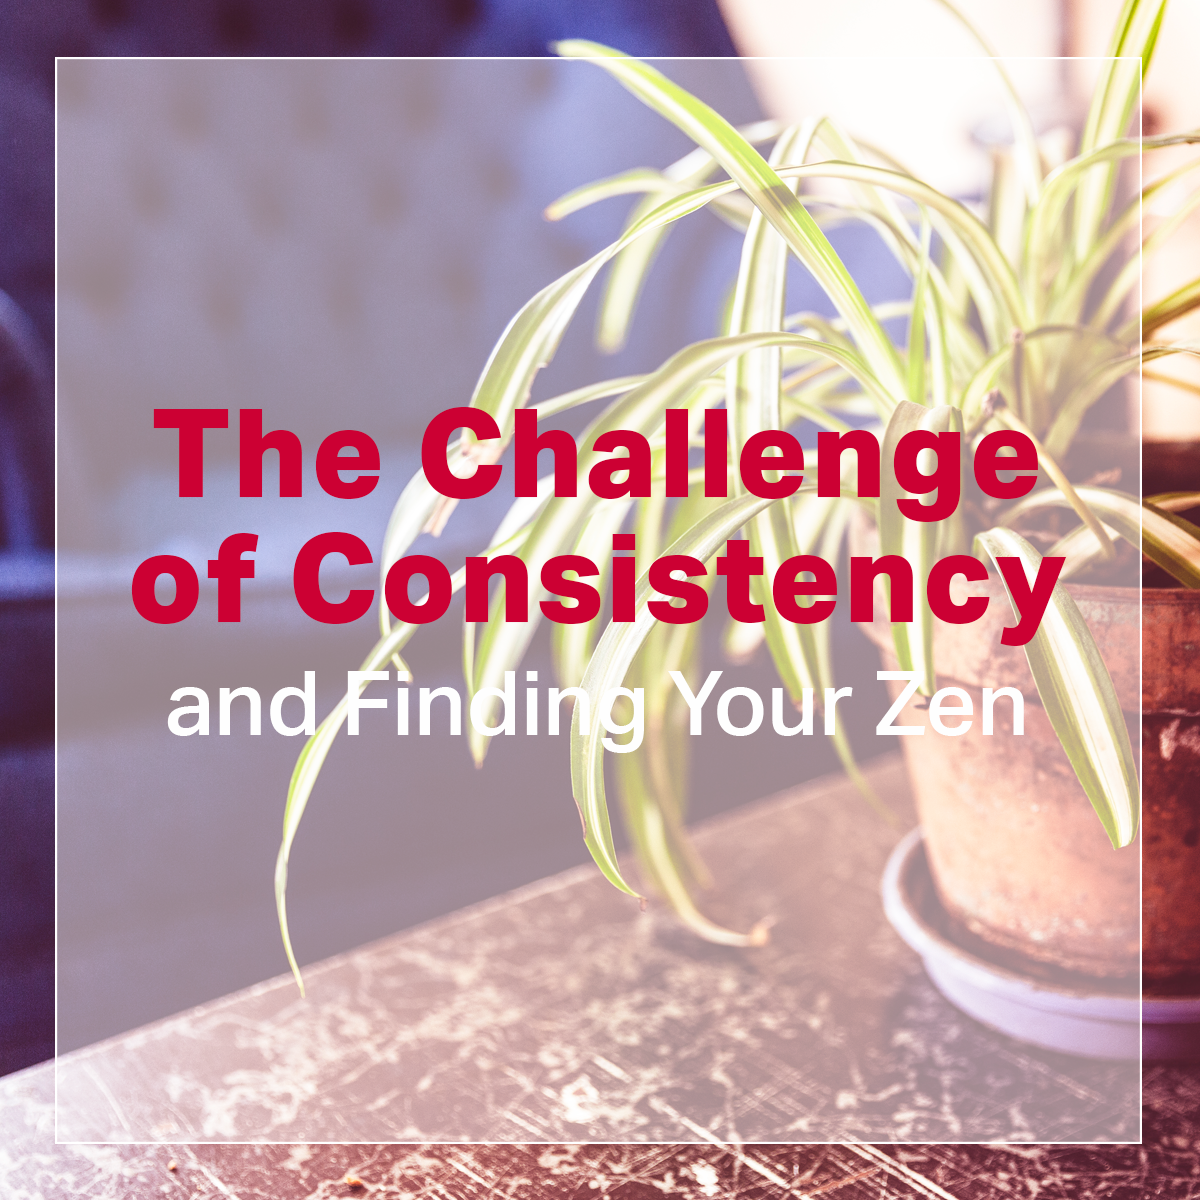 The Challenge of Consistency and Finding your Zen